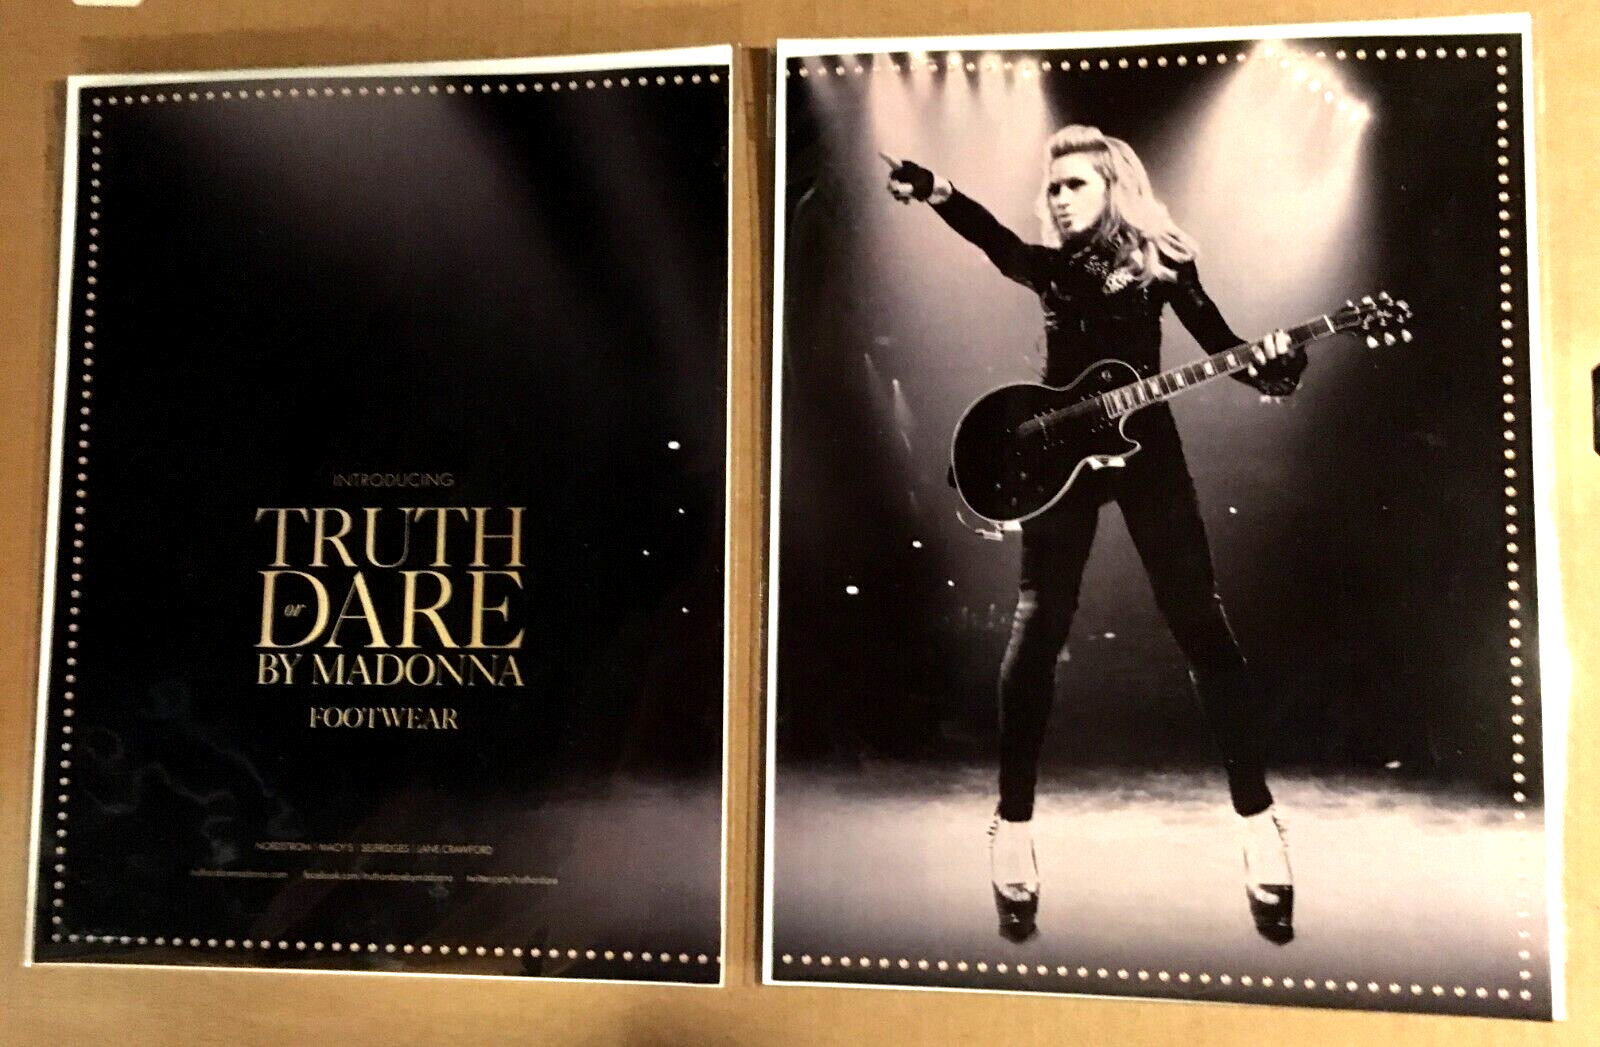 2012 Madonna Truth Or Dare Footwear Shoes 2-page PRINT AD Advertisement